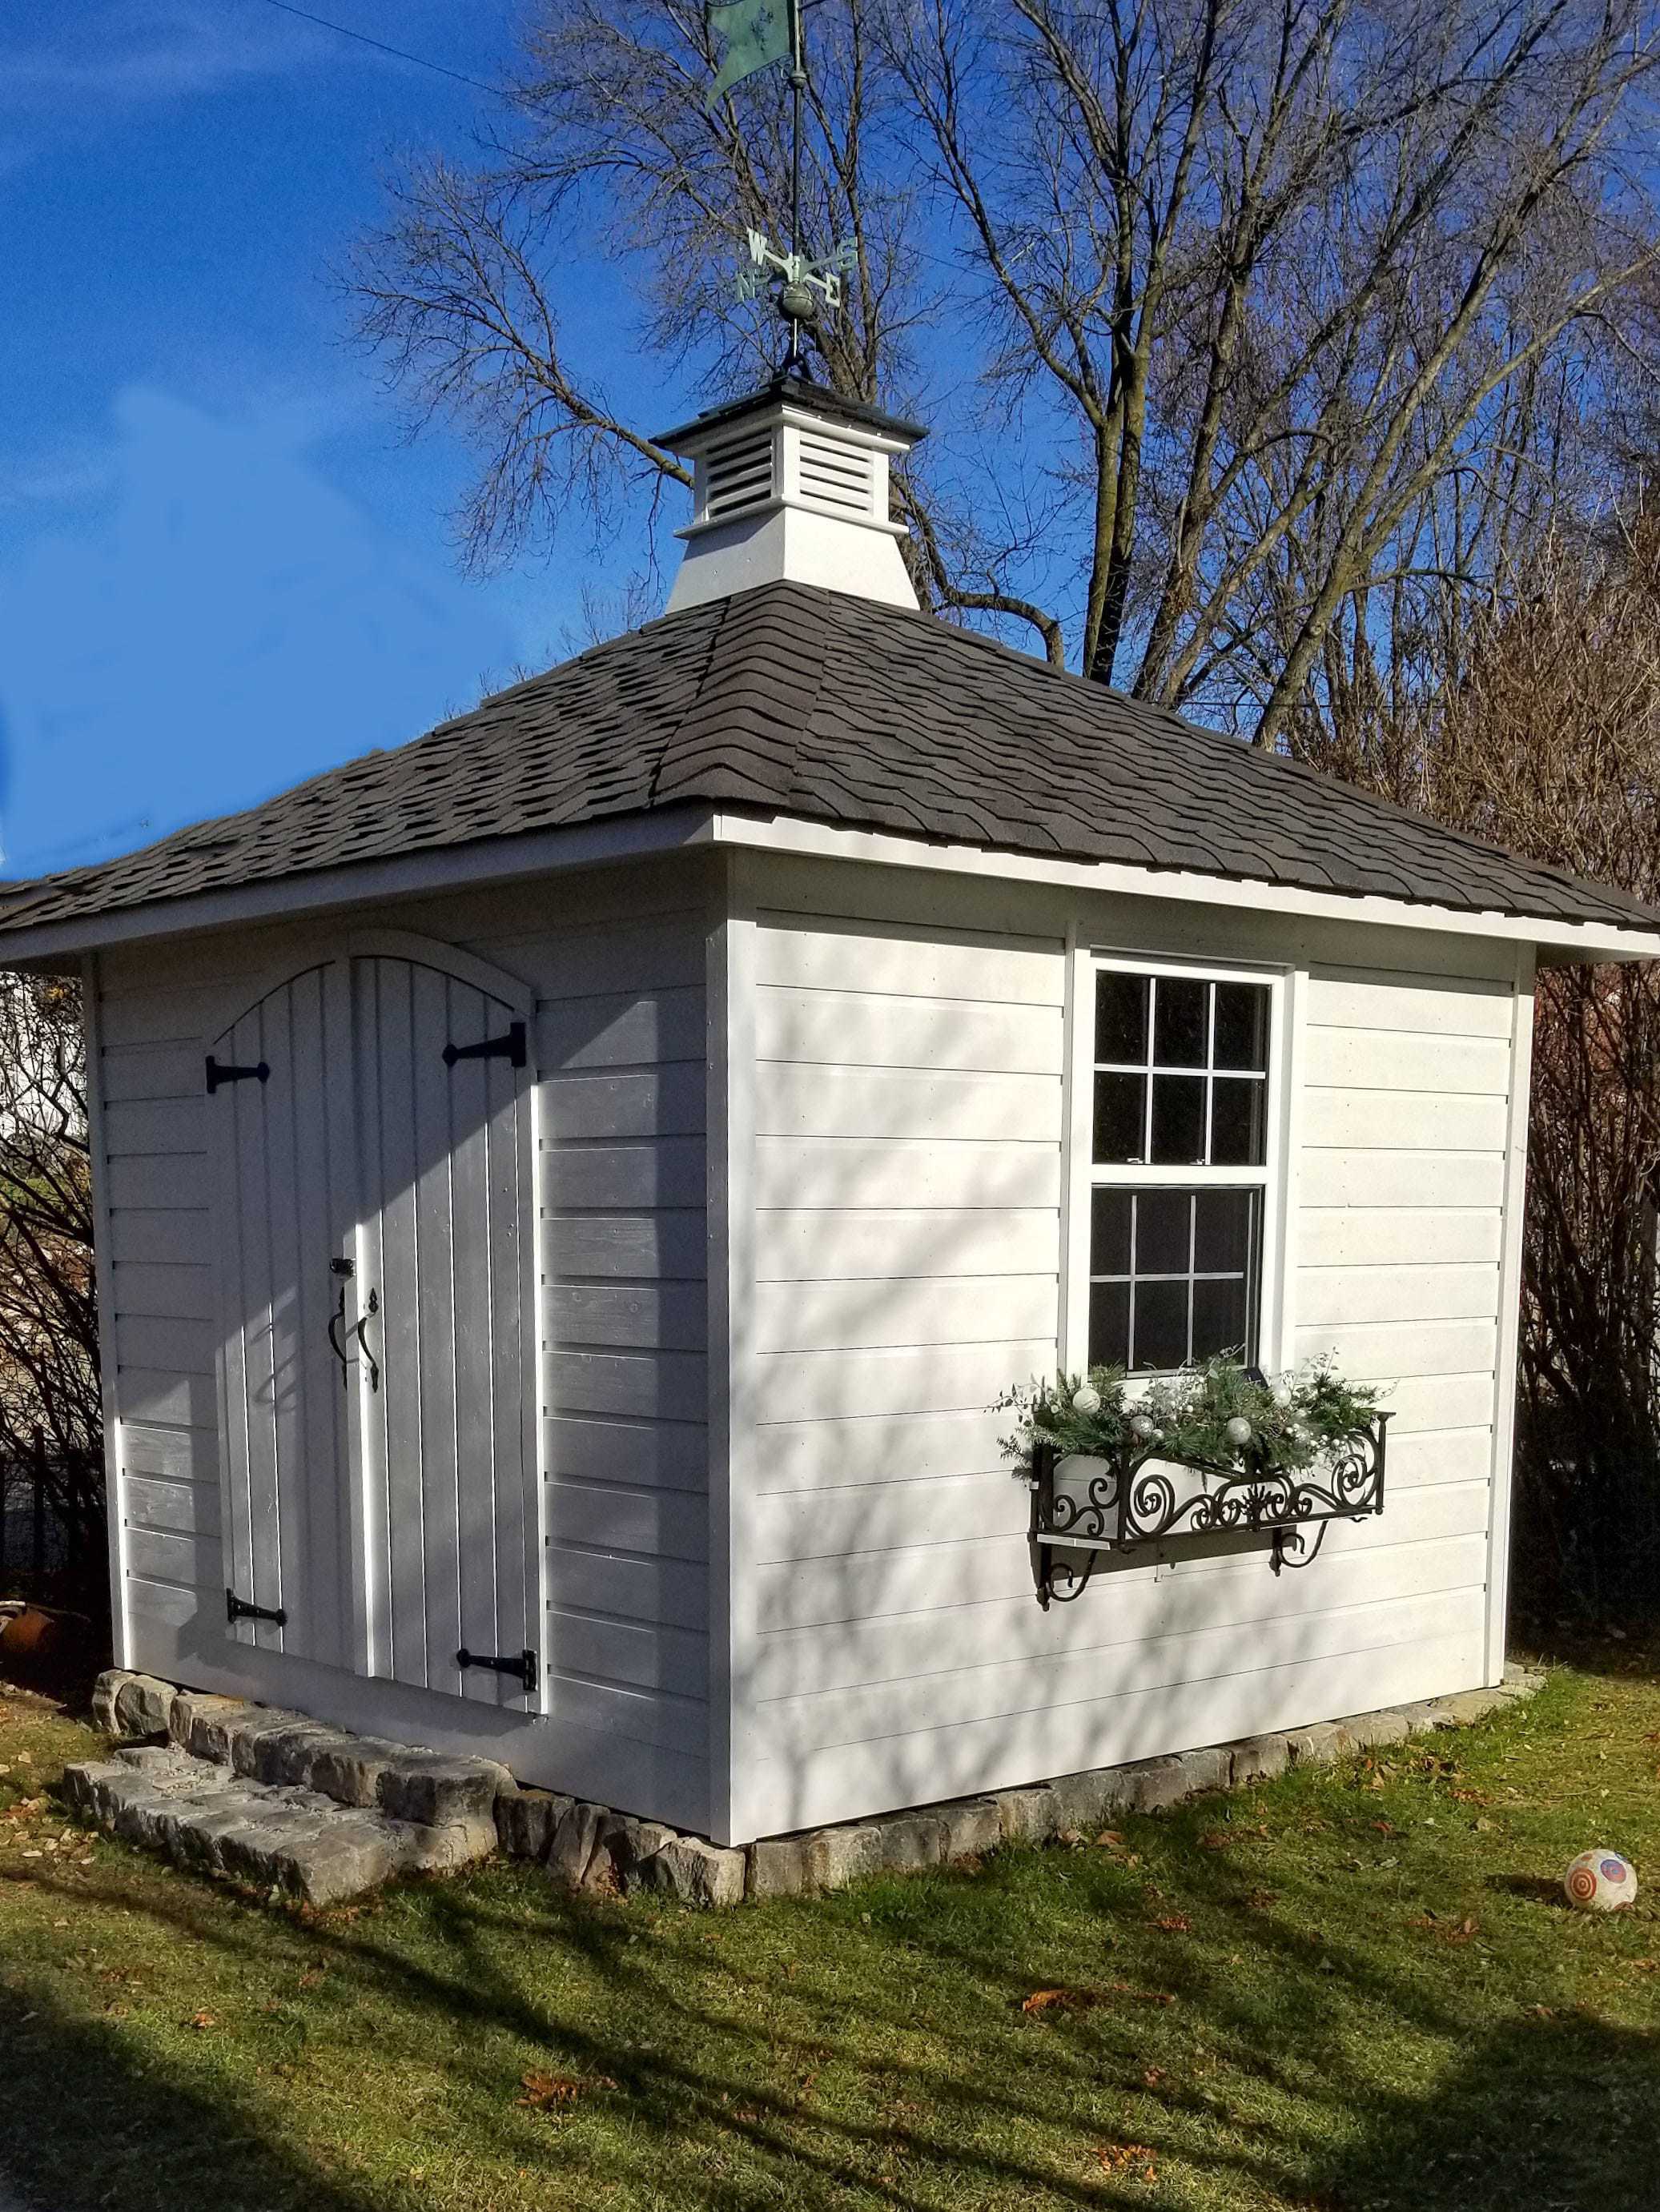 Sonoma 10x10 garden shed with cupola in St Paul Minnesota. ID number 220668-1